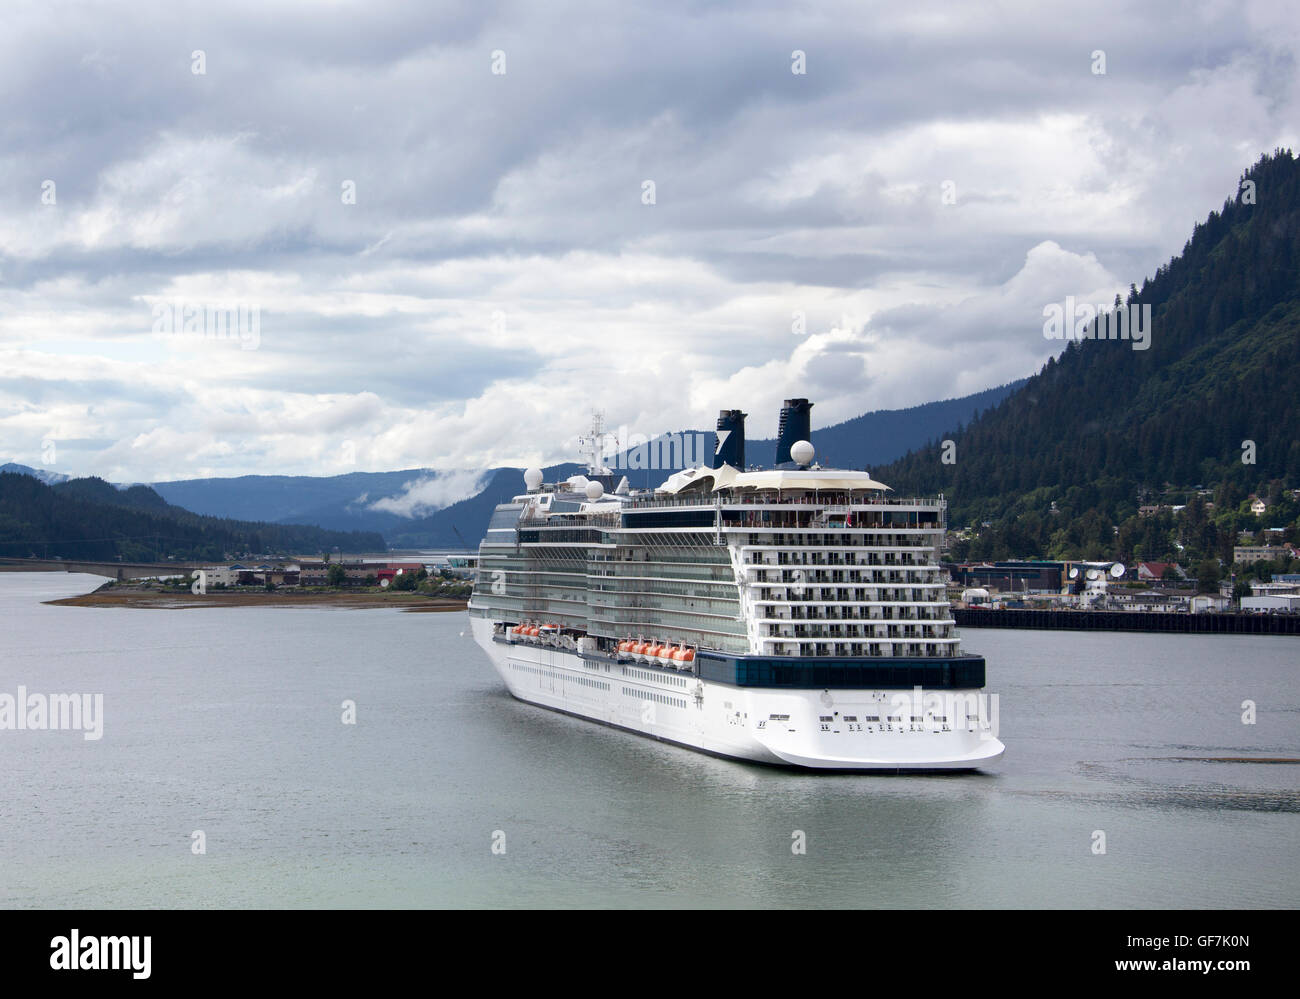 The cruise liner anchored in Juneau, the capital of Alaska. Stock Photo